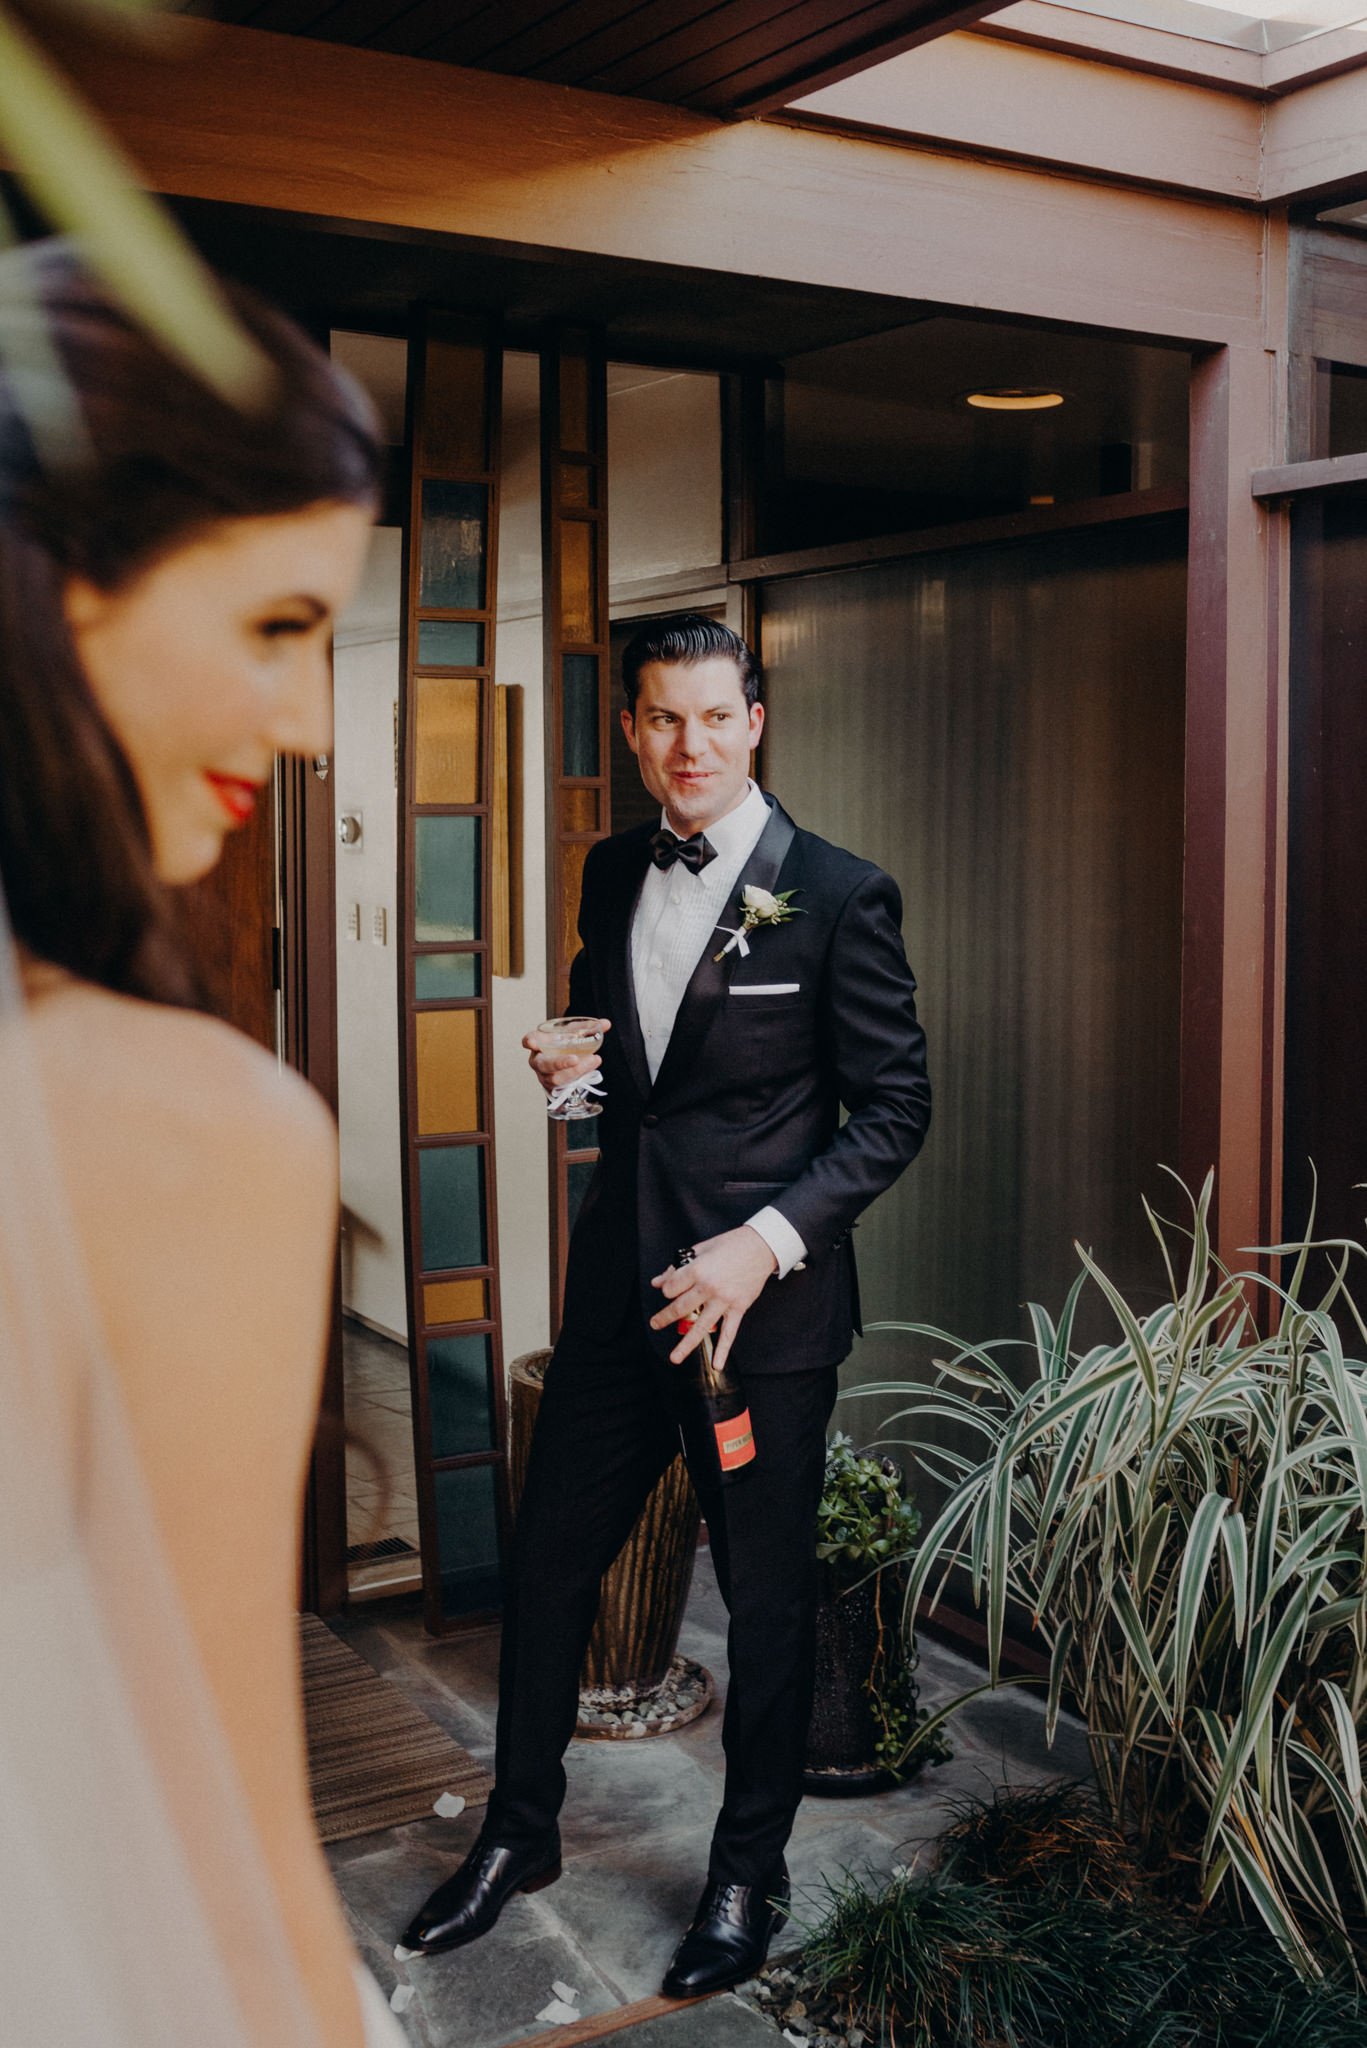 union station home bound brewery wedding - wedding photographers in los angeles - itlaphoto.com-34.jpg